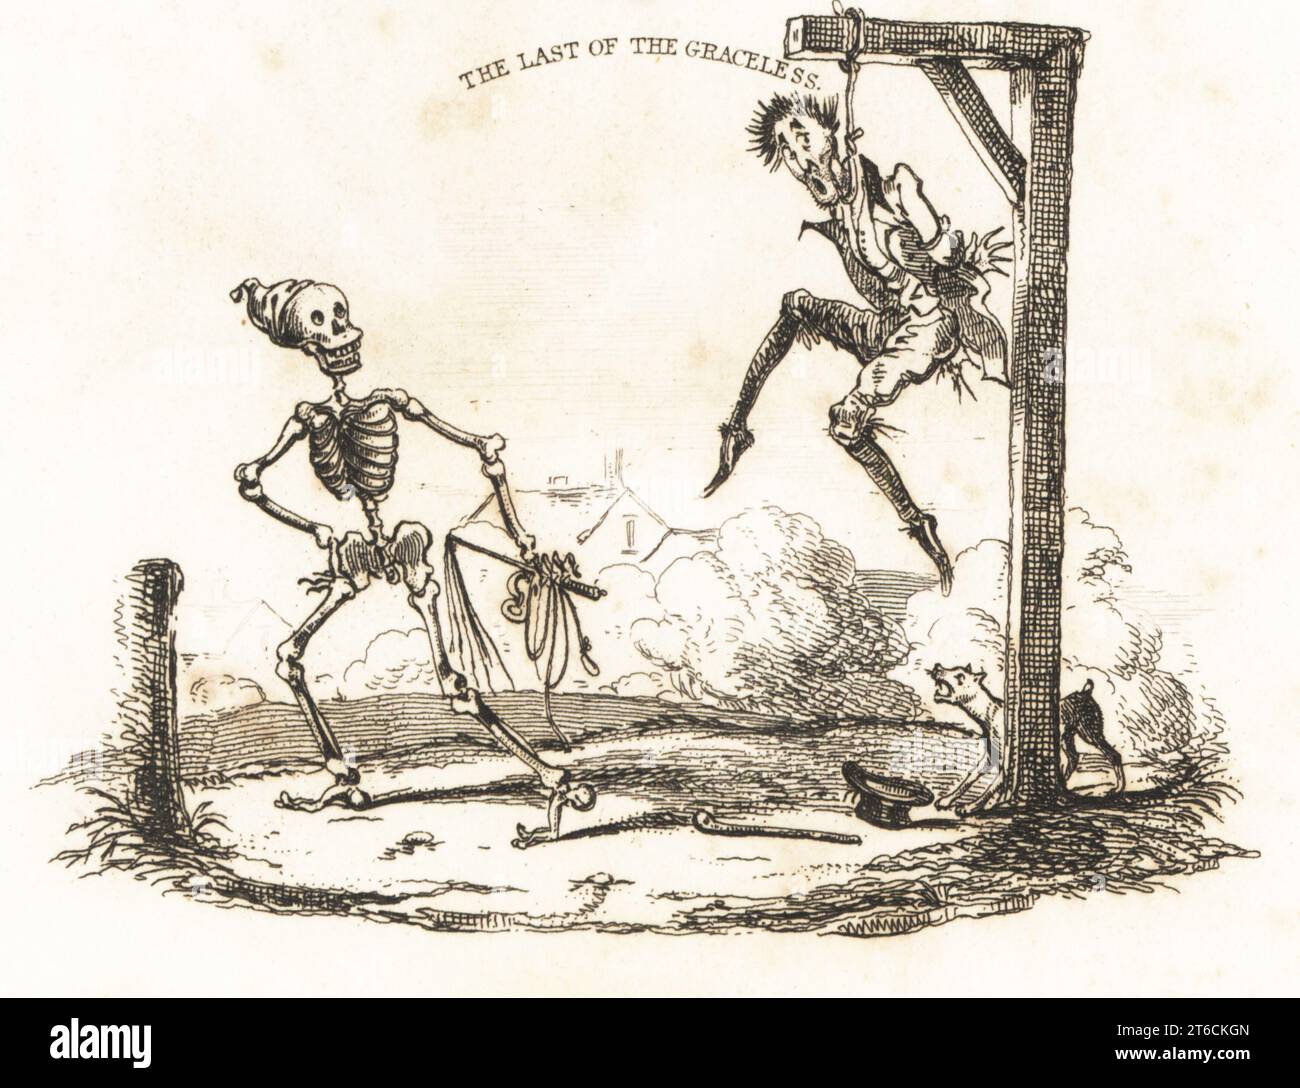 Vignette of the skeleton of Death with rope and whip looking at a man hanging from a gibbet, the Last of the Graceless. Drawn and engraved on steel by Richard Dagley from his own Deaths Doings, Consisting of Numerous Original Compositions in Verse and Prose, J. Andrews, London, 1827. Dagley (1761-1841) was an English painter, illustrator and engraver. Stock Photo